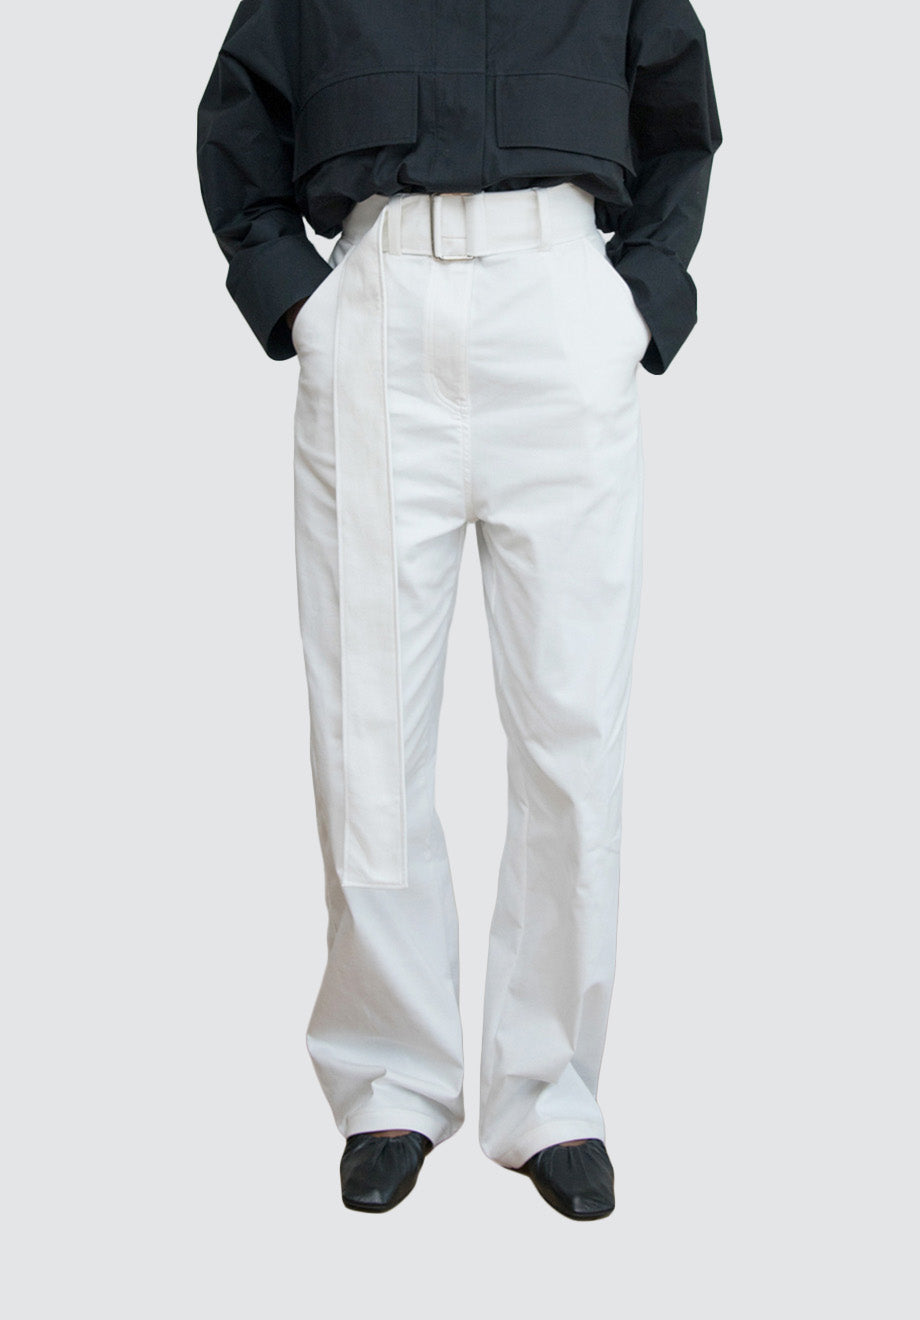 Straight Cut Belted Trouser